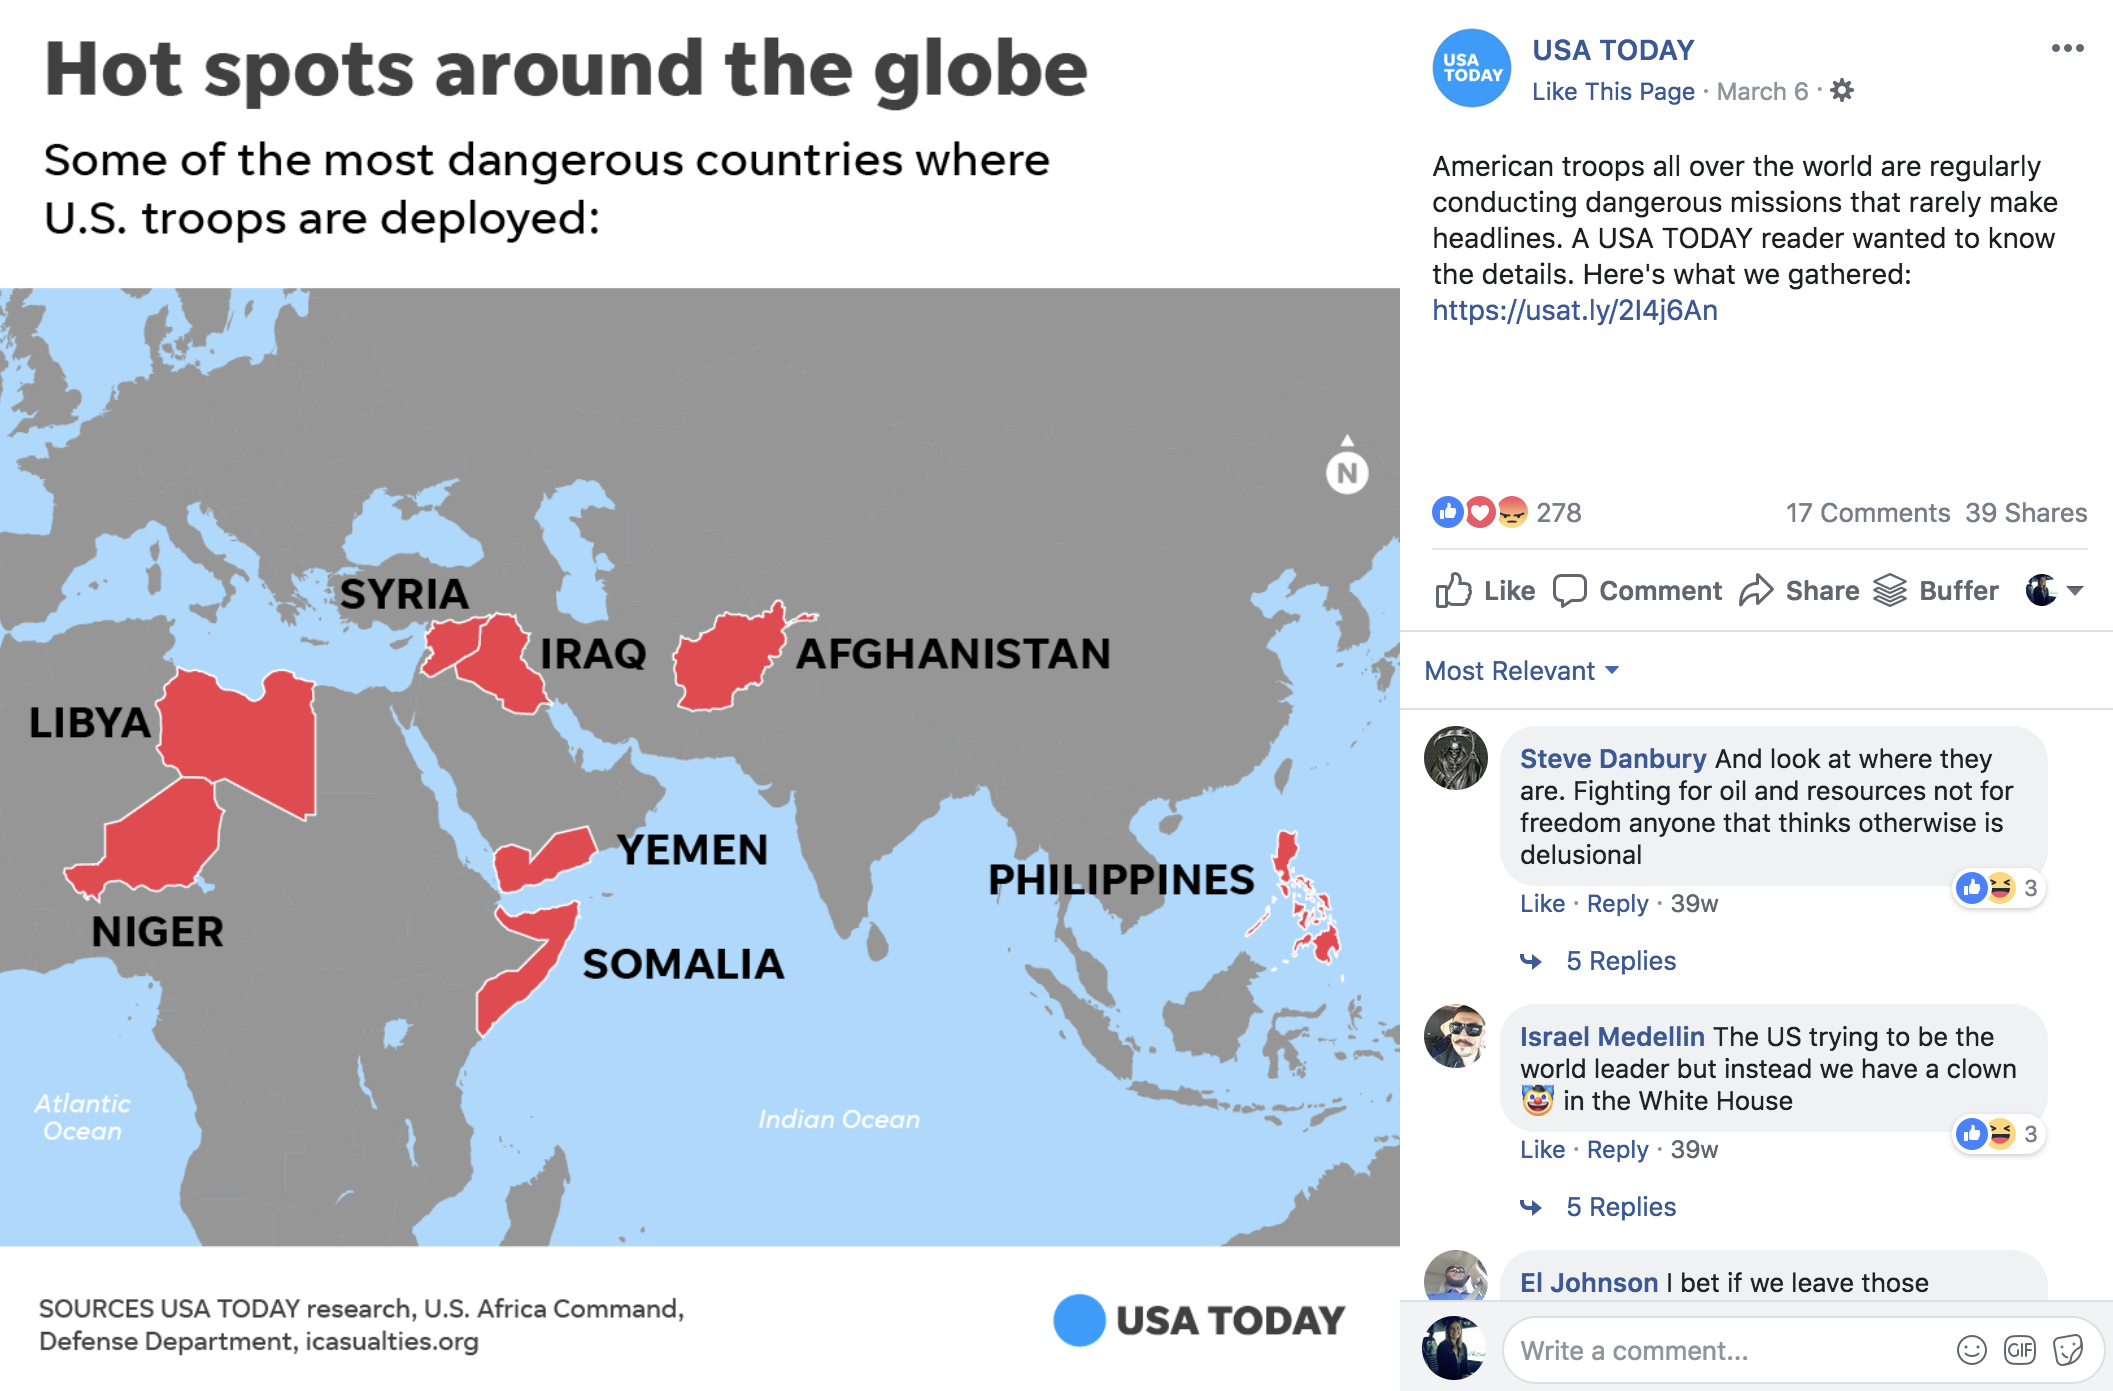 Screenshot from USA TODAY's Facebook page, highlighting how a story came together: "A USA TODAY reader wanted to know the details. Here's what we gathered"